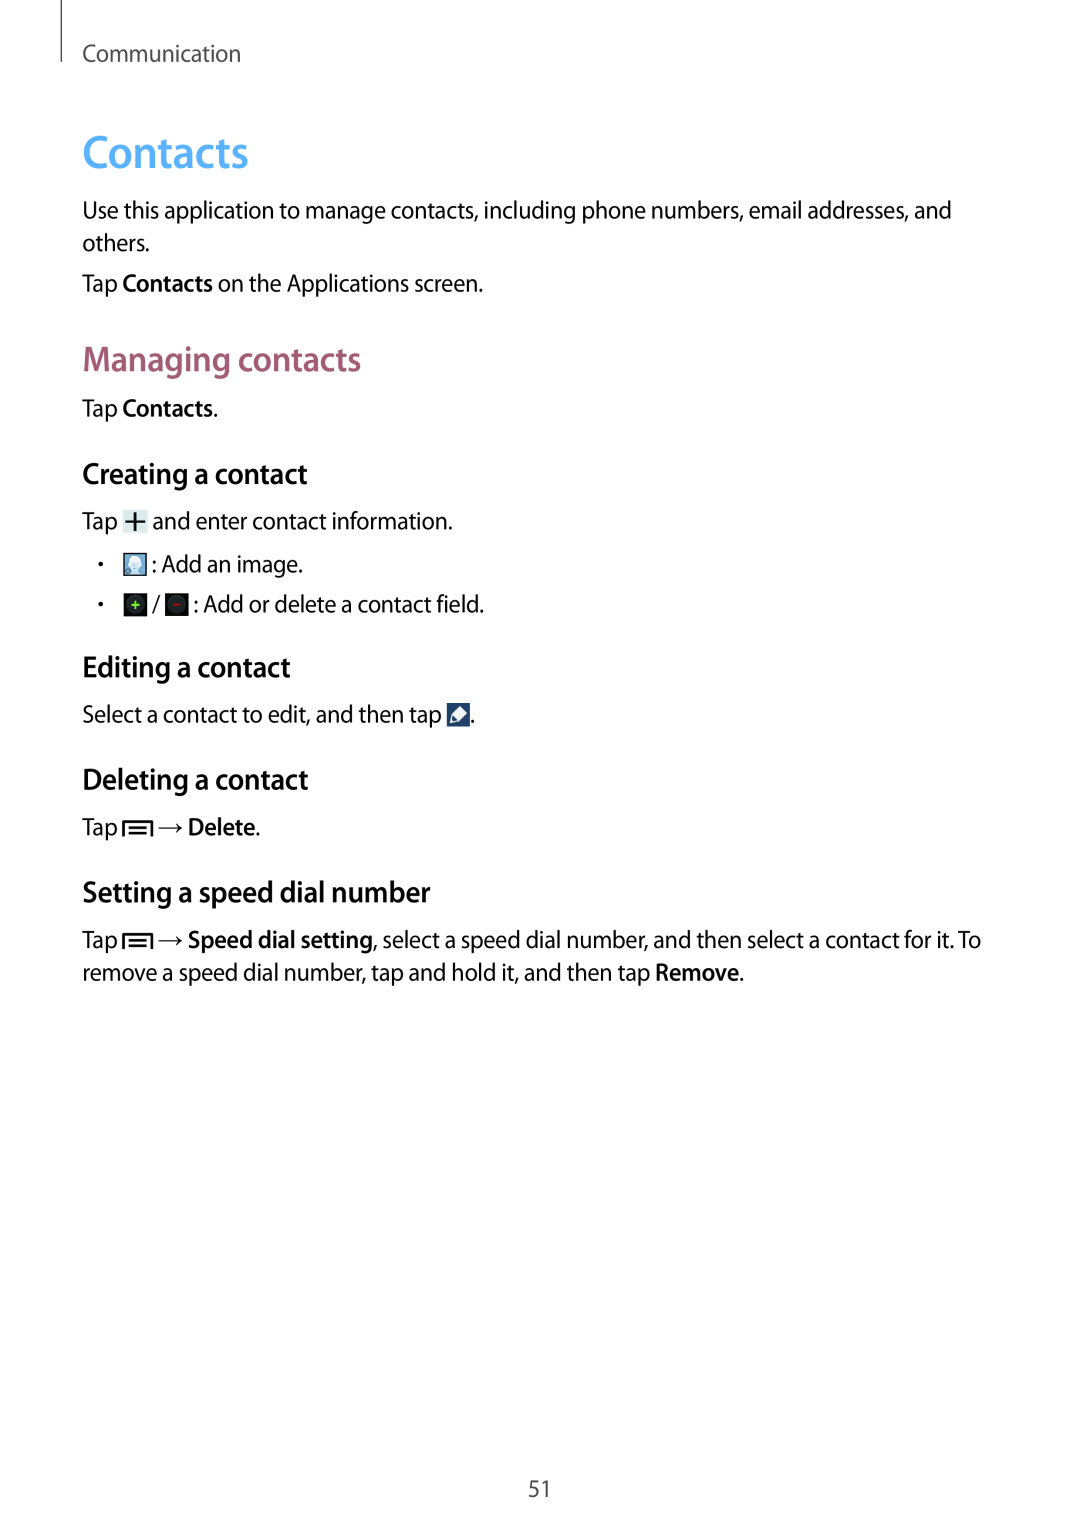 Samsung GT-I9305RWDNEE manual Contacts, Managing contacts, Creating a contact, Editing a contact, Deleting a contact 